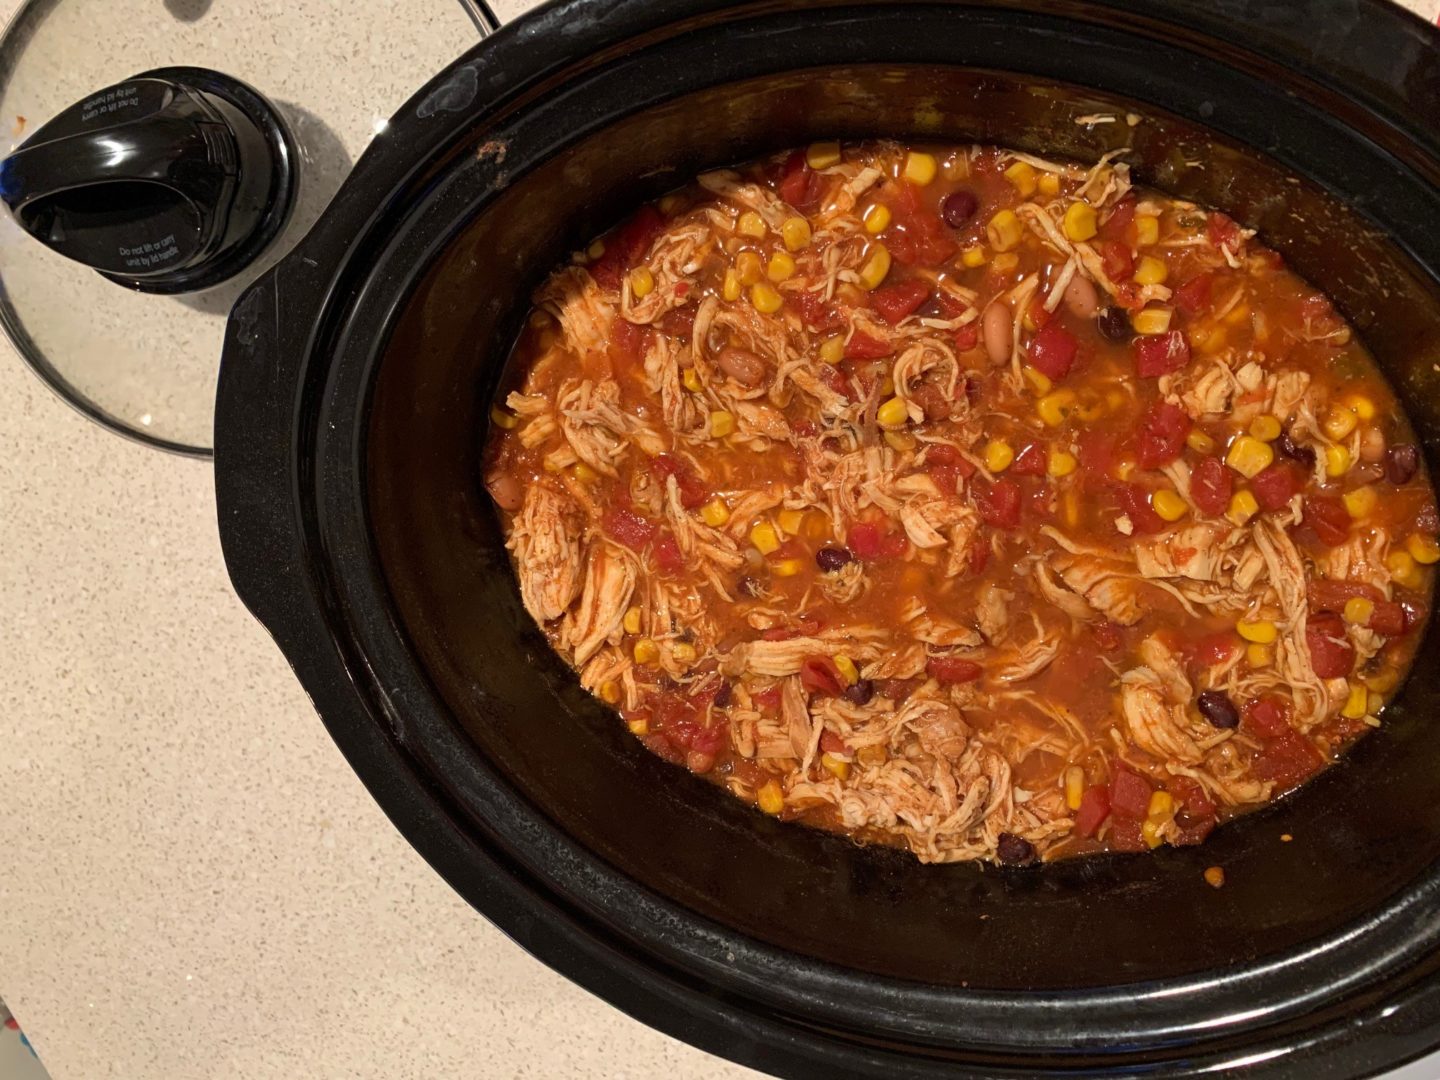 Slow Cooker Chicken Taco Soup